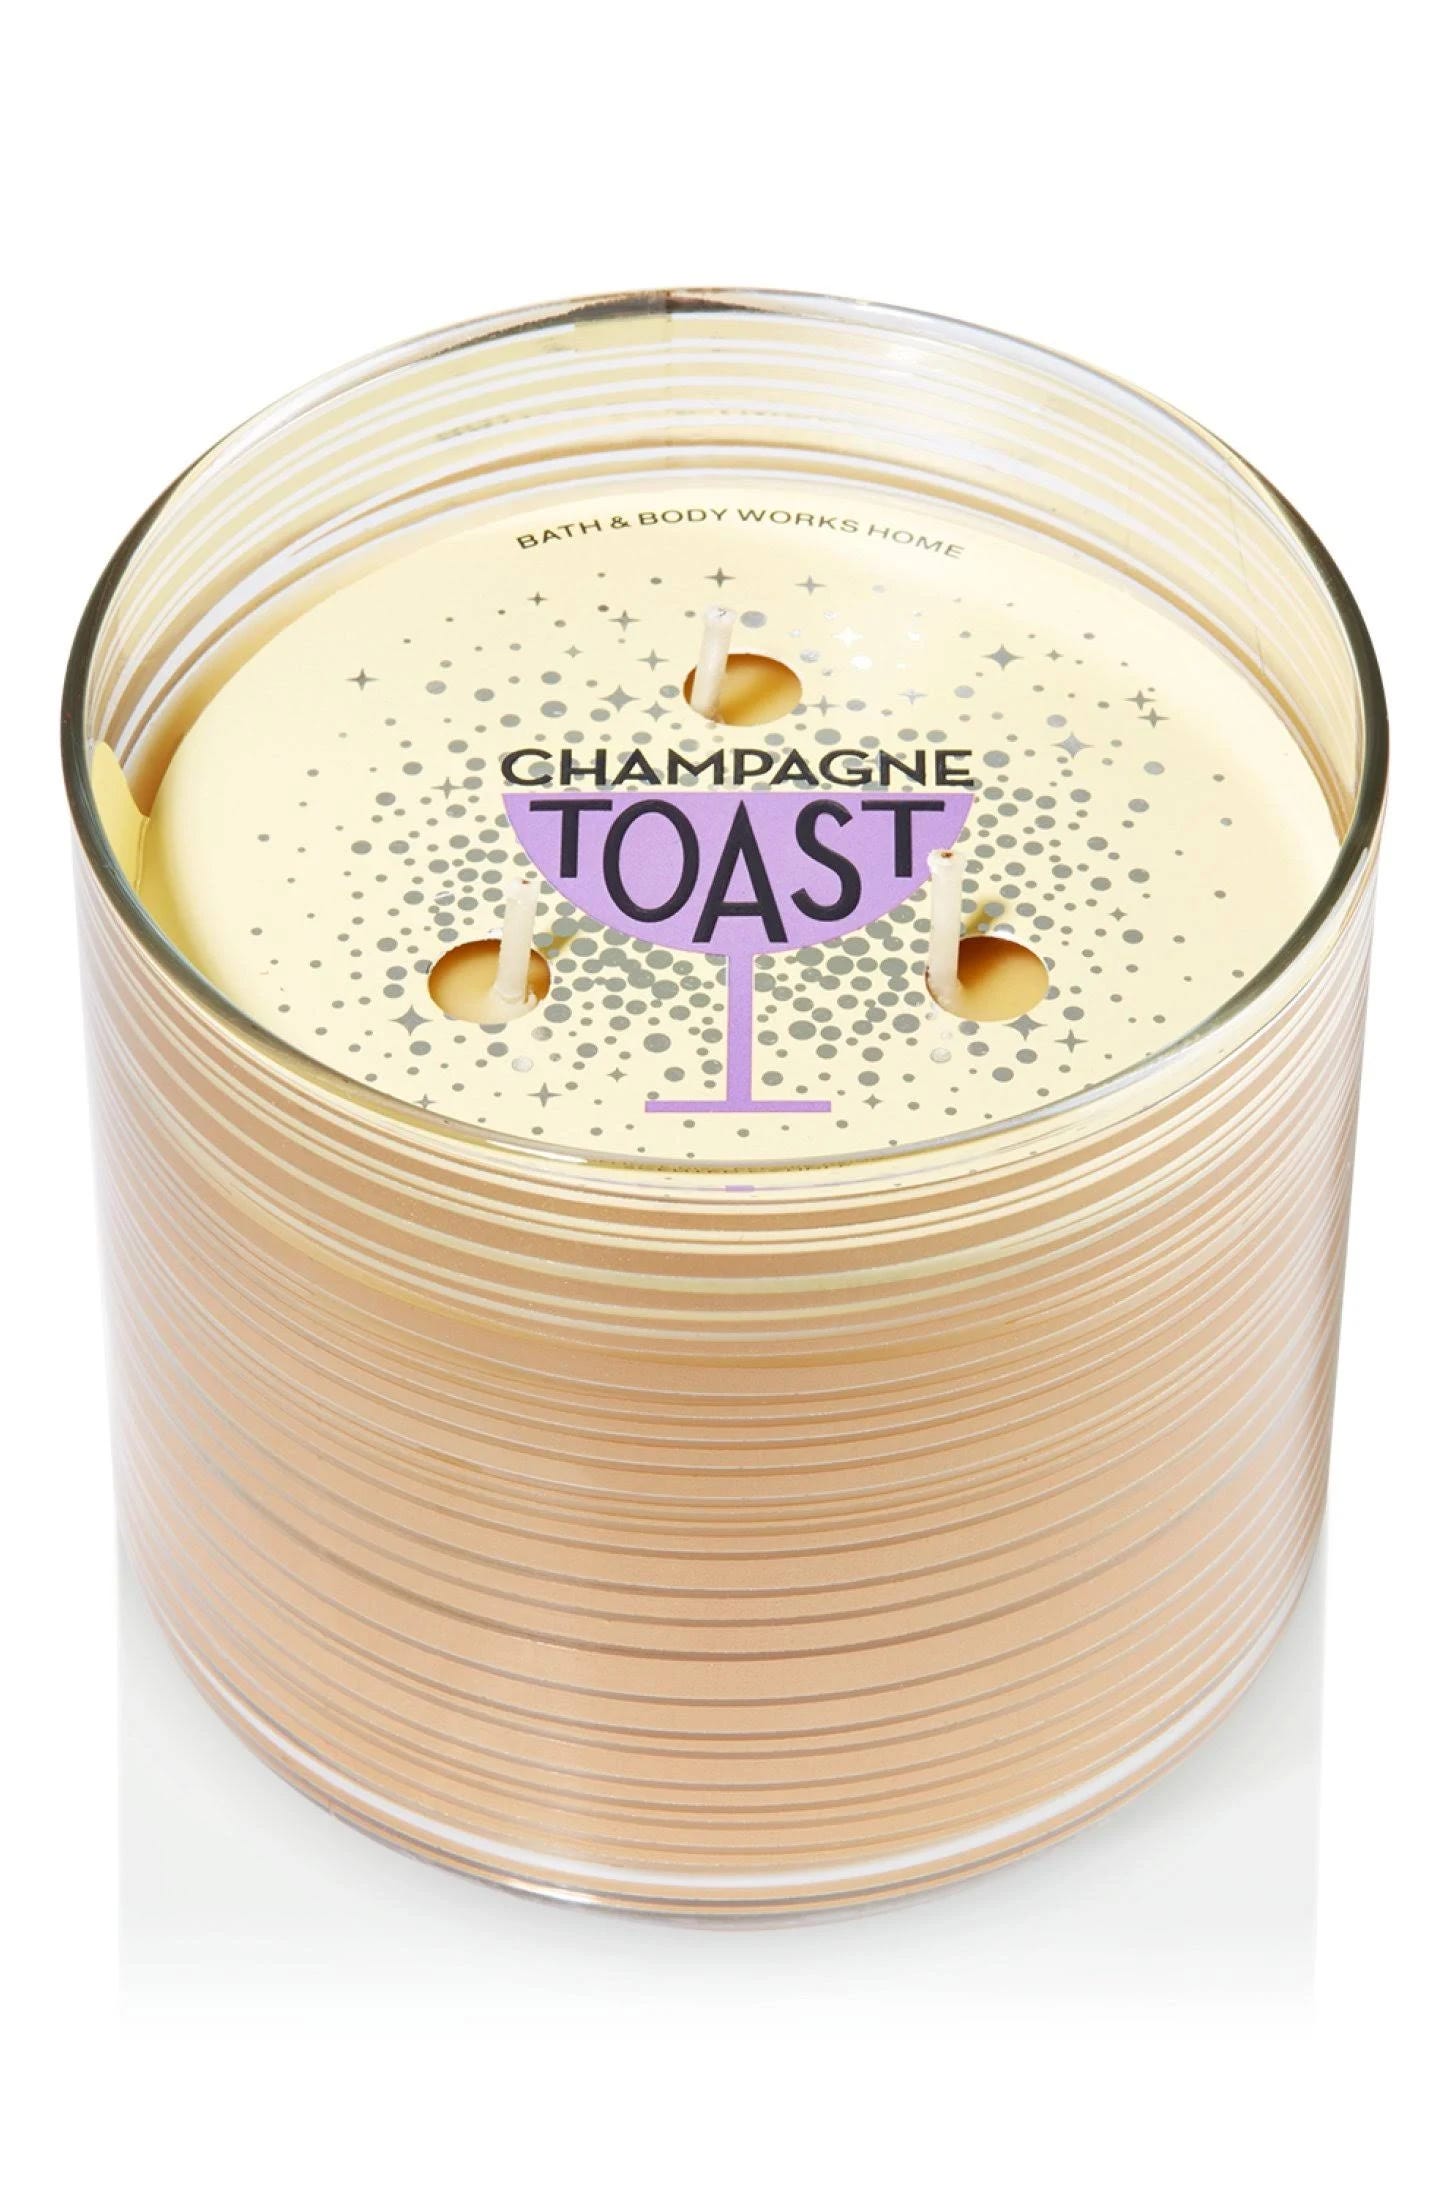 White Barn Accents: Champagne Toast Gold Candle (14.5 oz) | Image